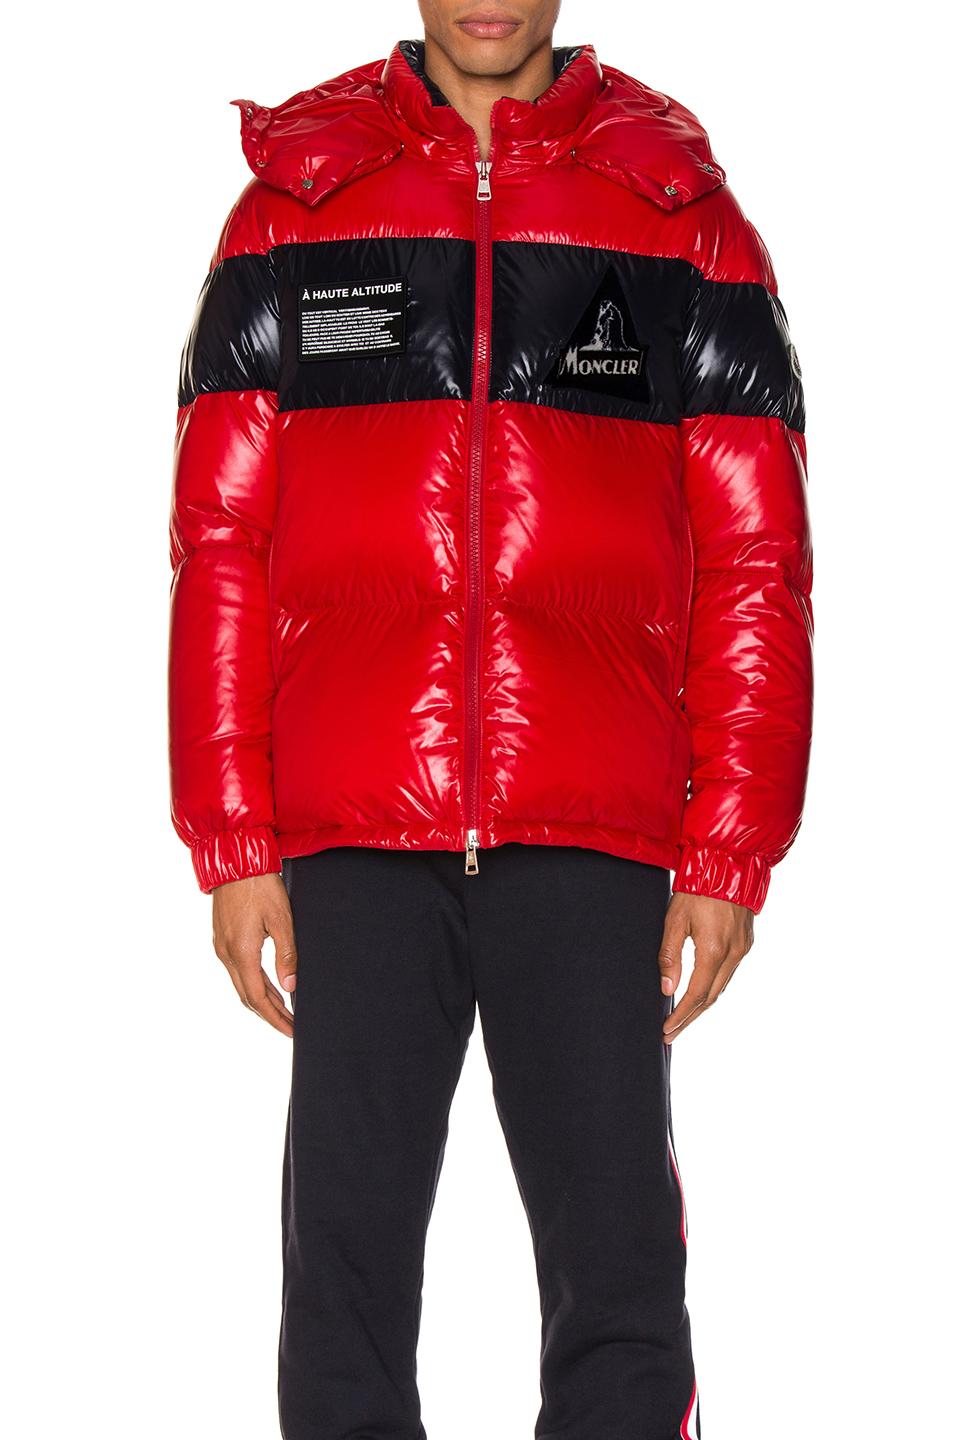 moncler down jacket red